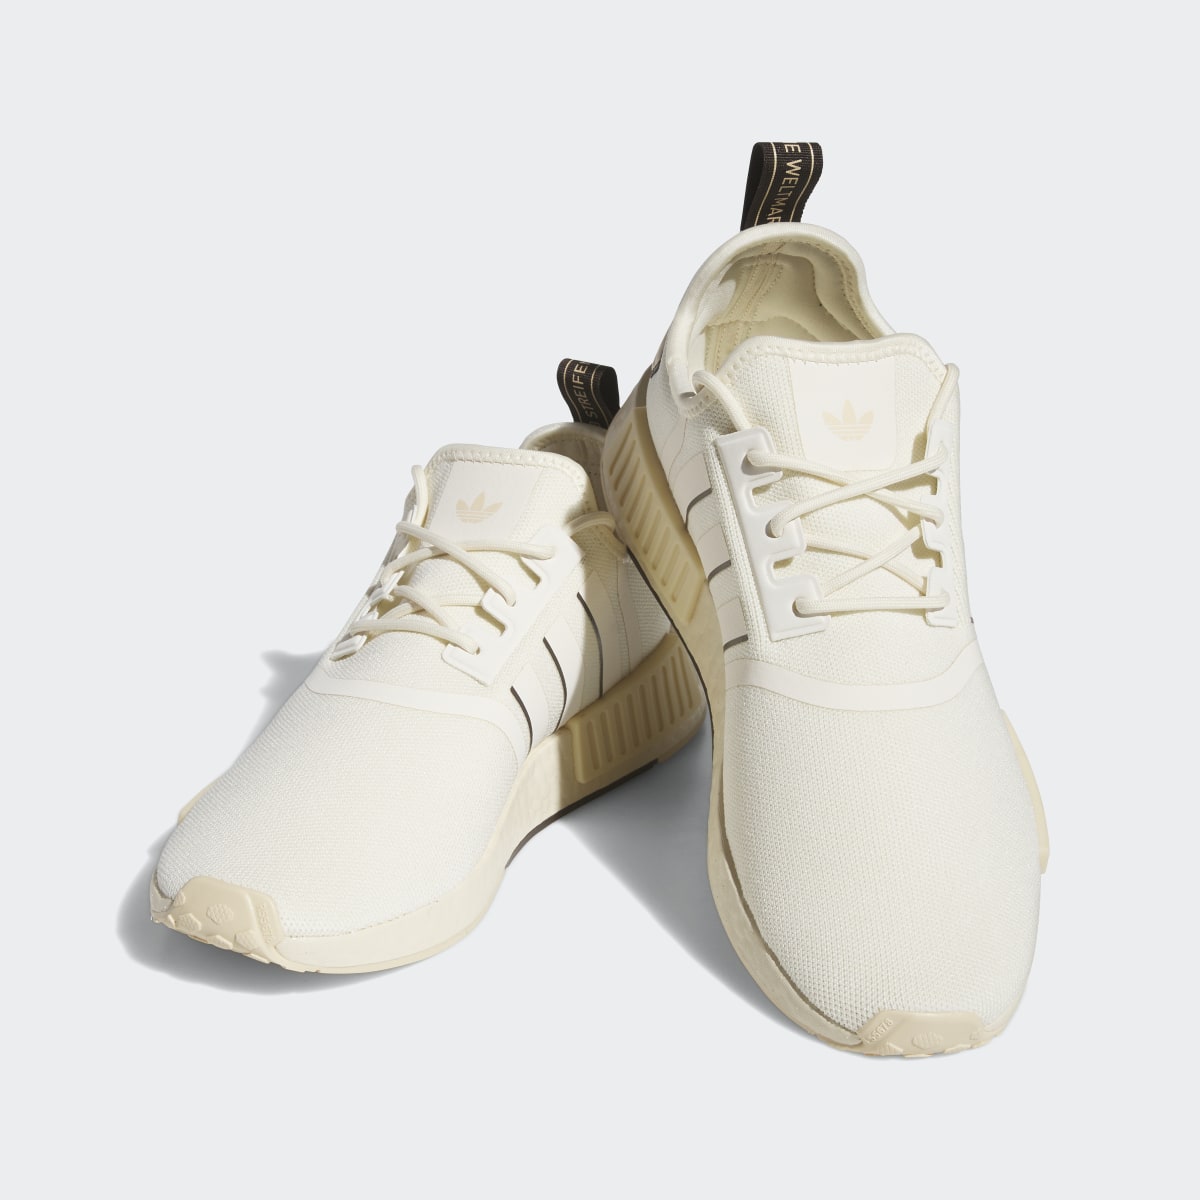 Adidas NMD_R1 Low Trainers. 5